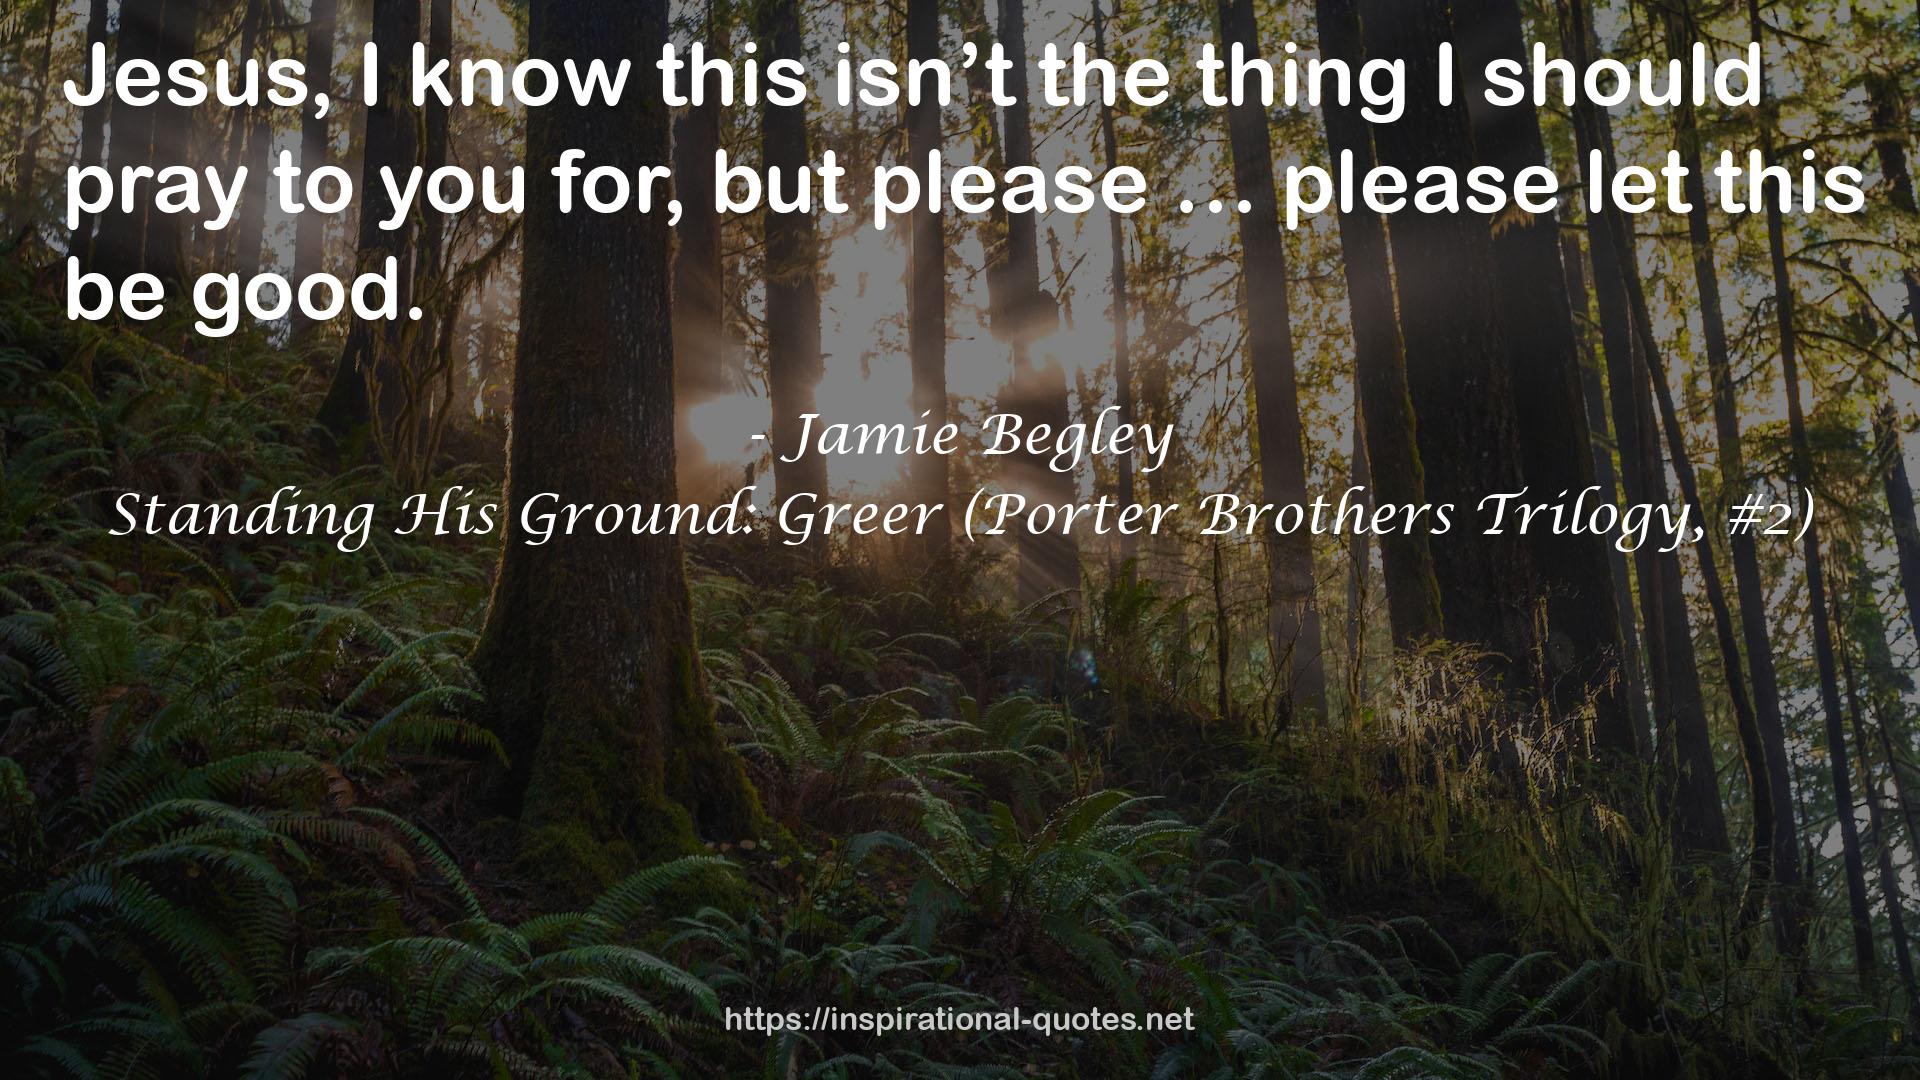 Standing His Ground: Greer (Porter Brothers Trilogy, #2) QUOTES